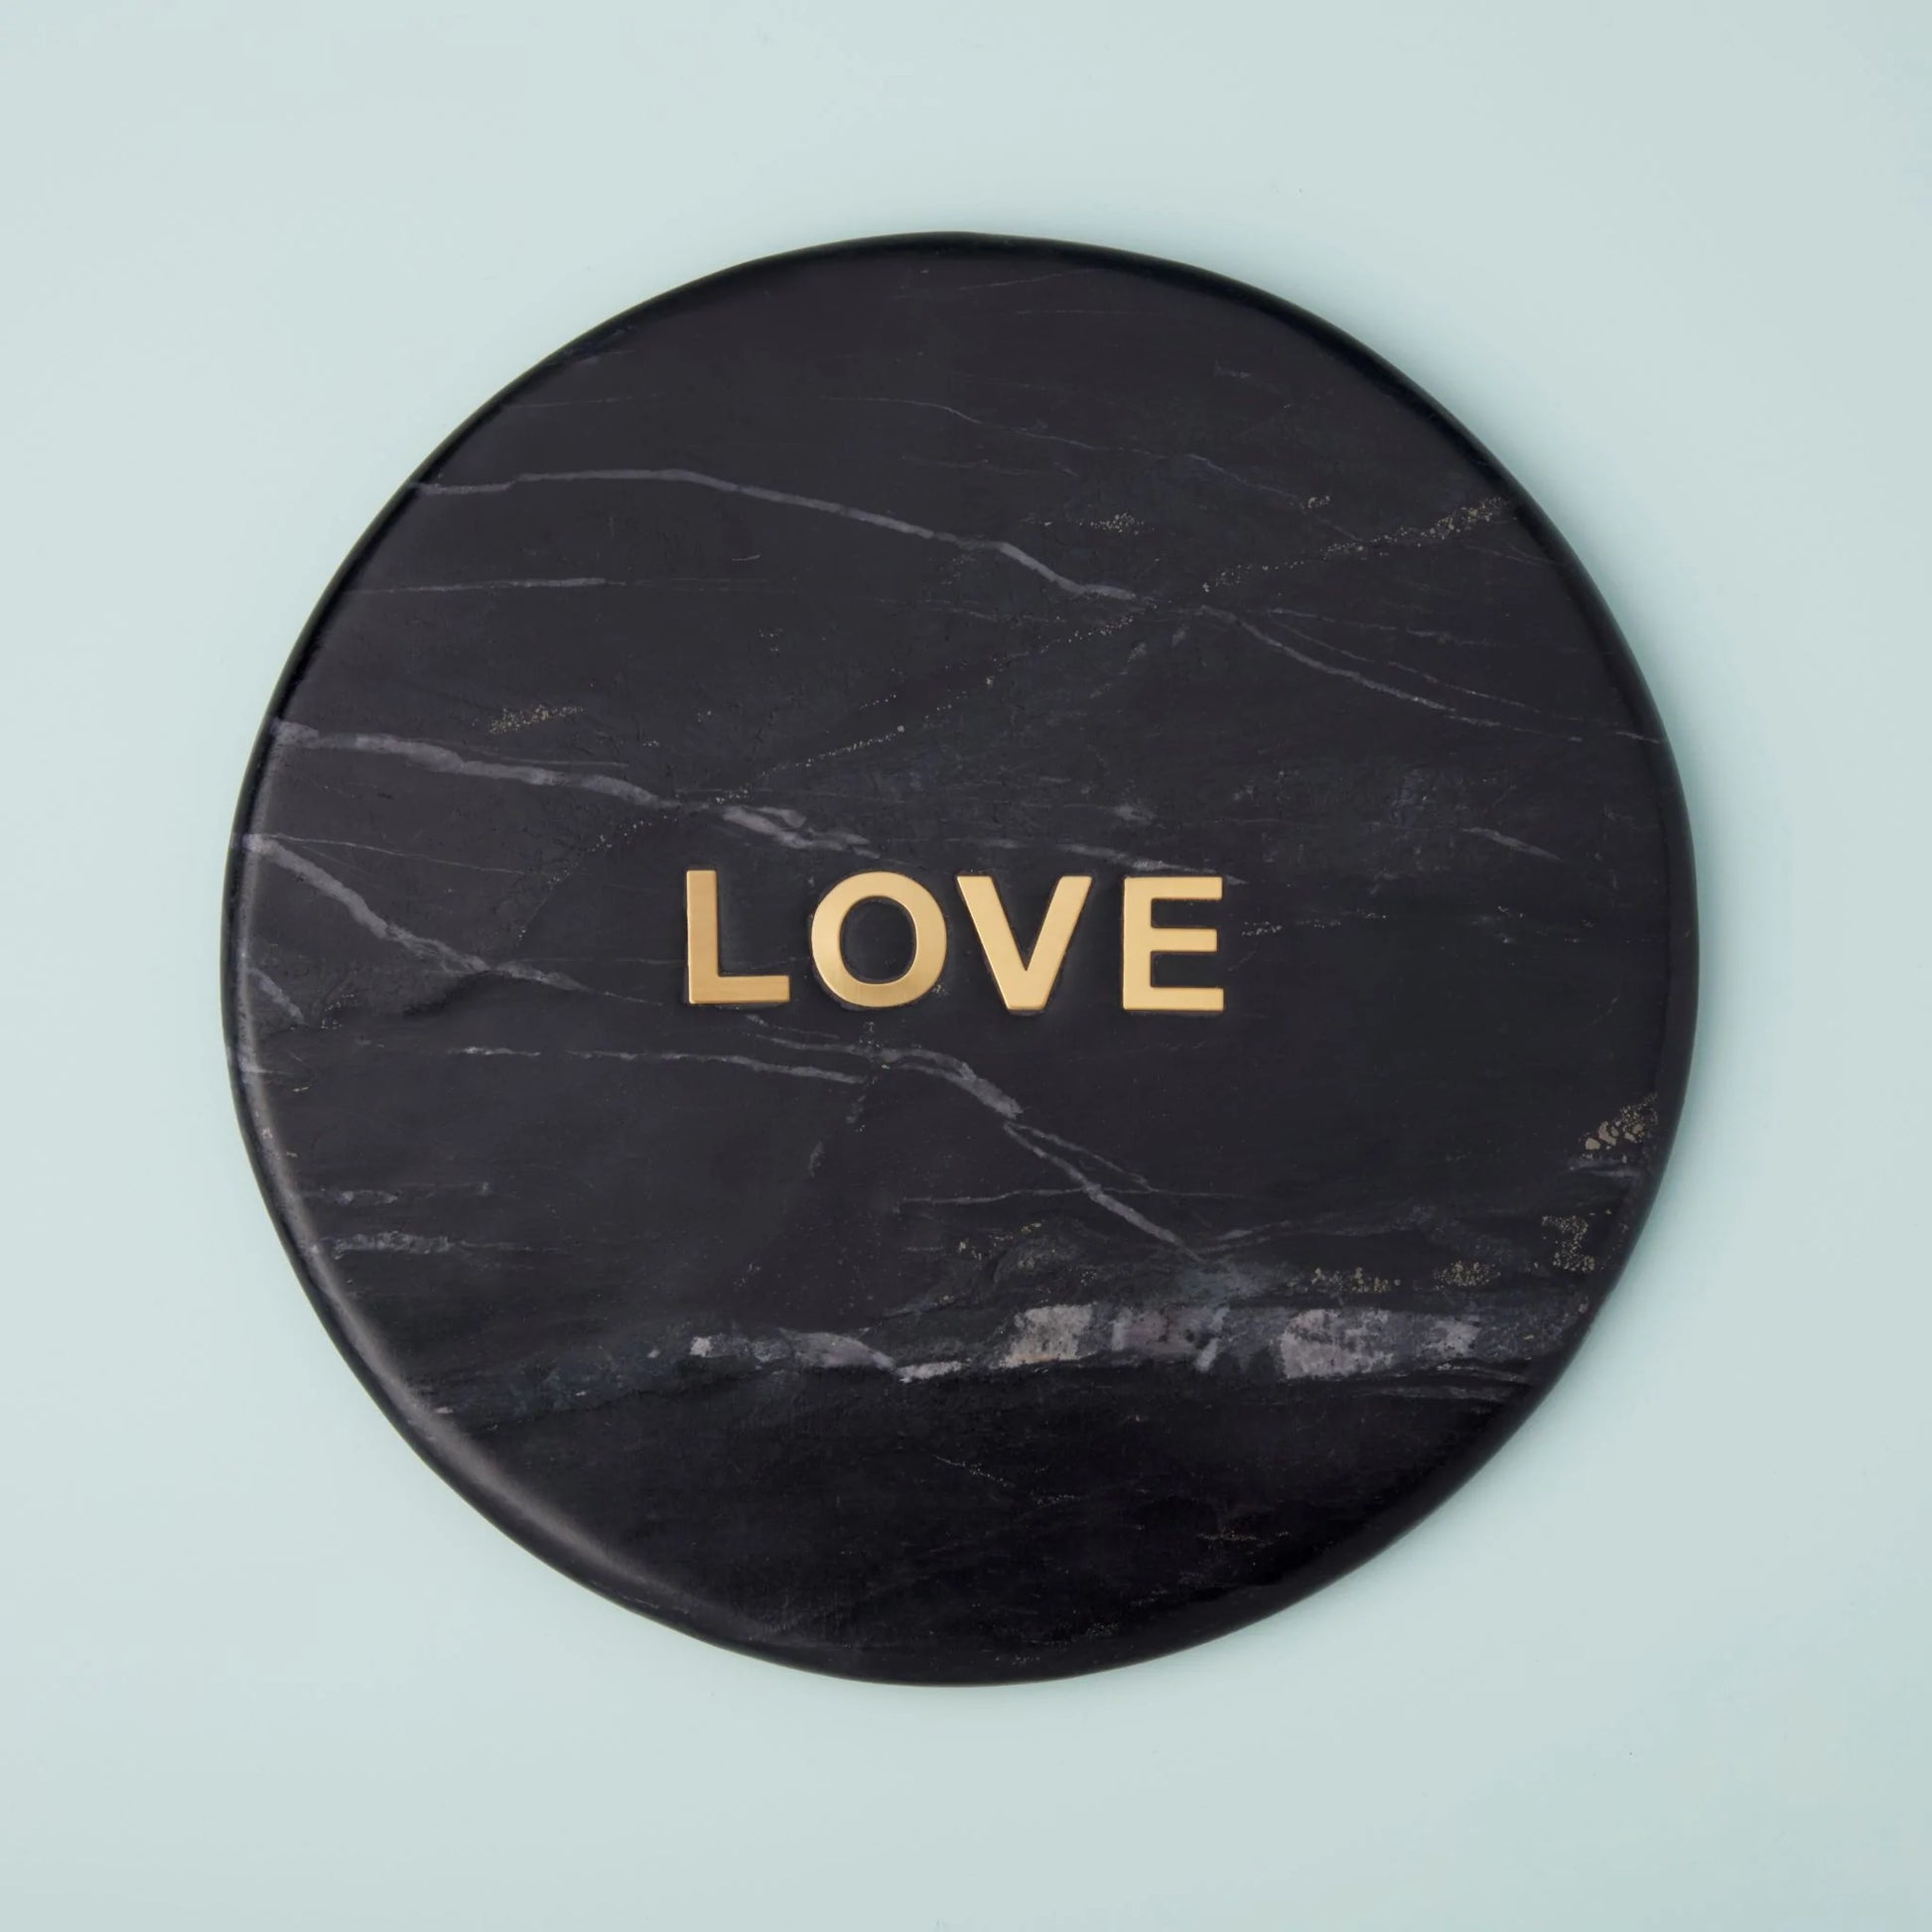 Salerno Black Marble "Love" Board - A luxurious Salerno Black Marble "Love" Board from GRACE BLU SHOPPE, ideal for serving or as a statement piece.